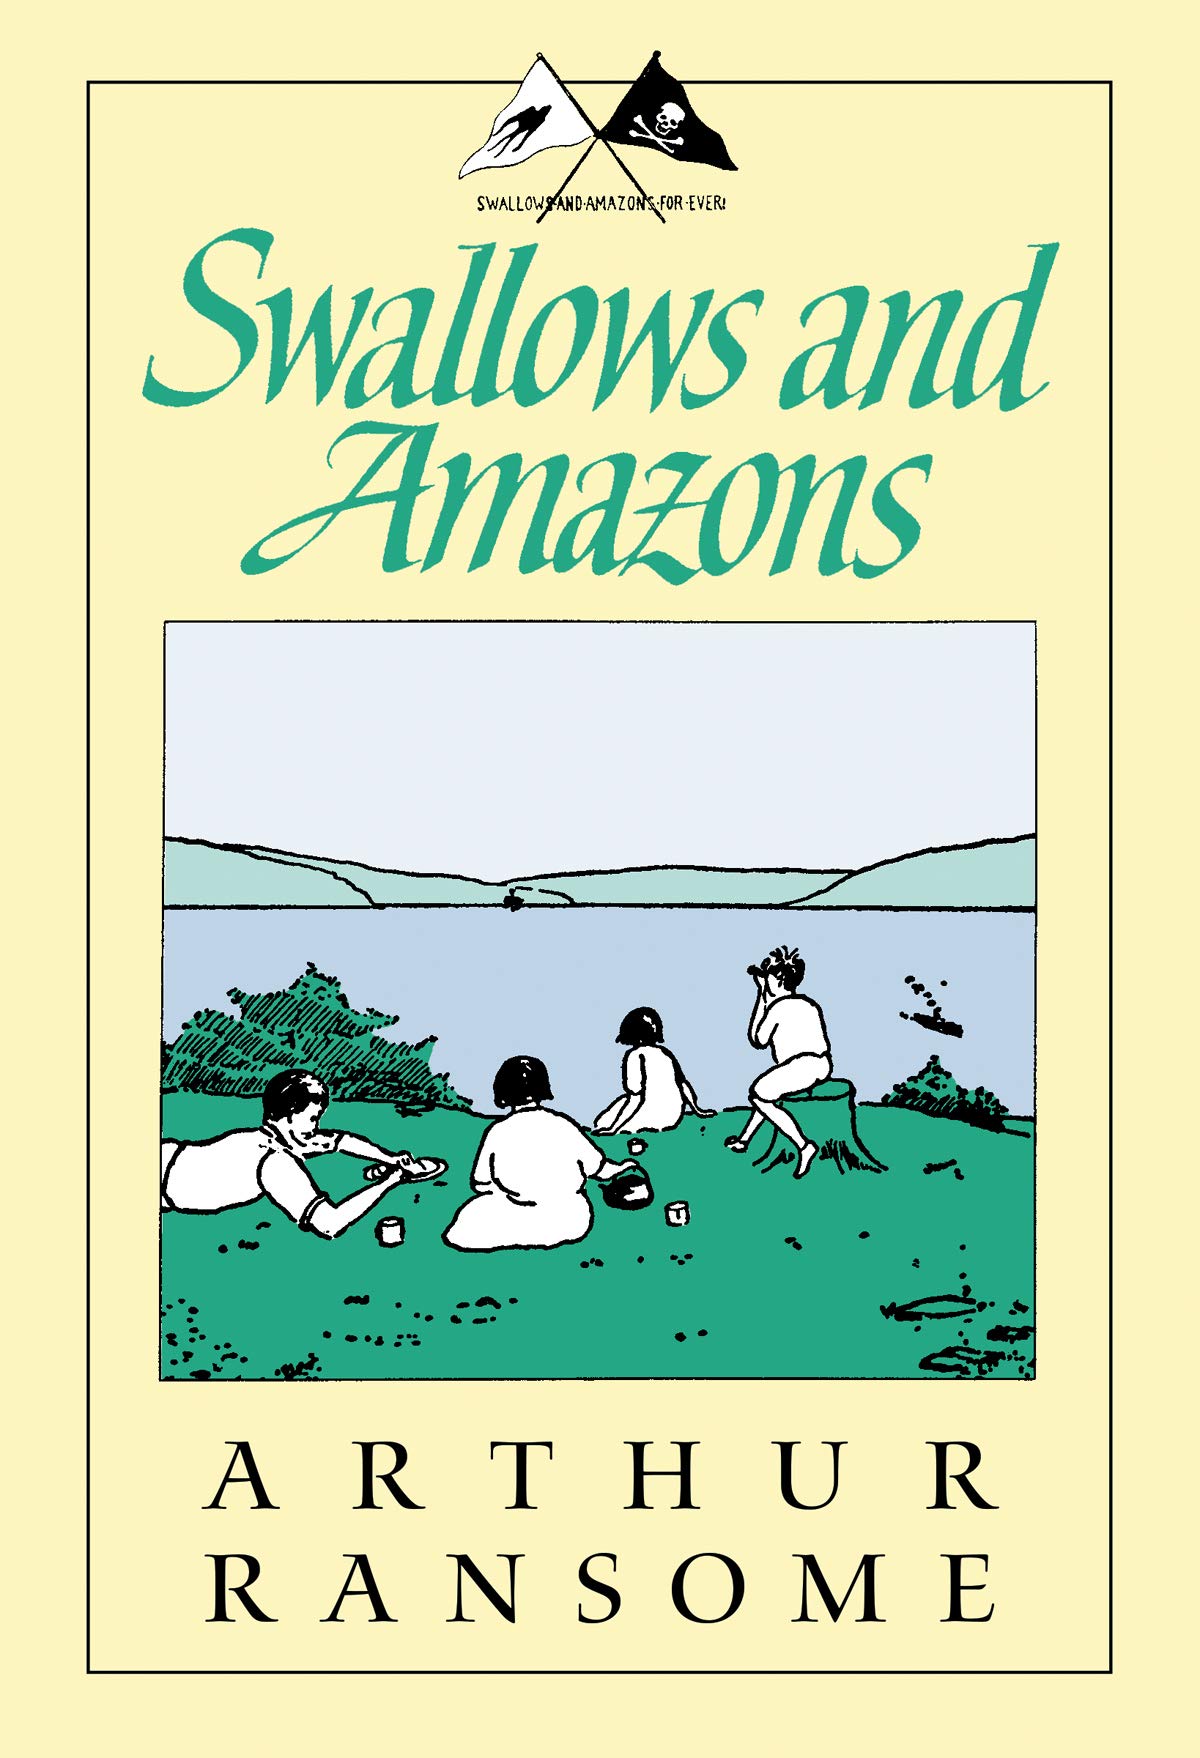 Swallows and Amazons (Godine Storyteller) by Arthur Ransome